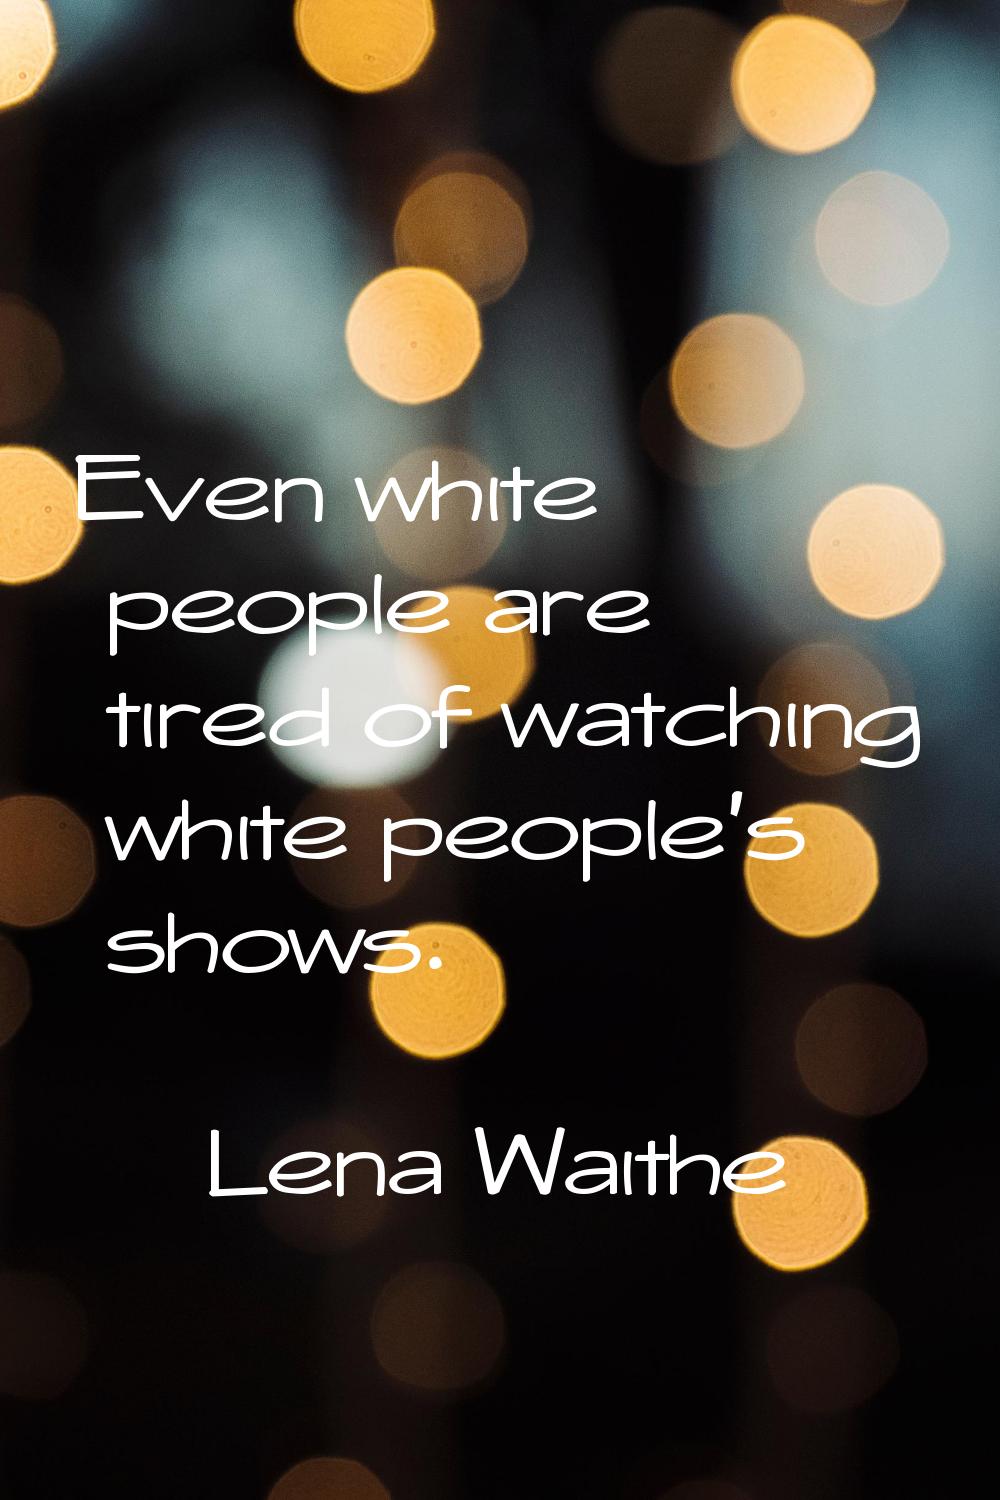 Even white people are tired of watching white people's shows.